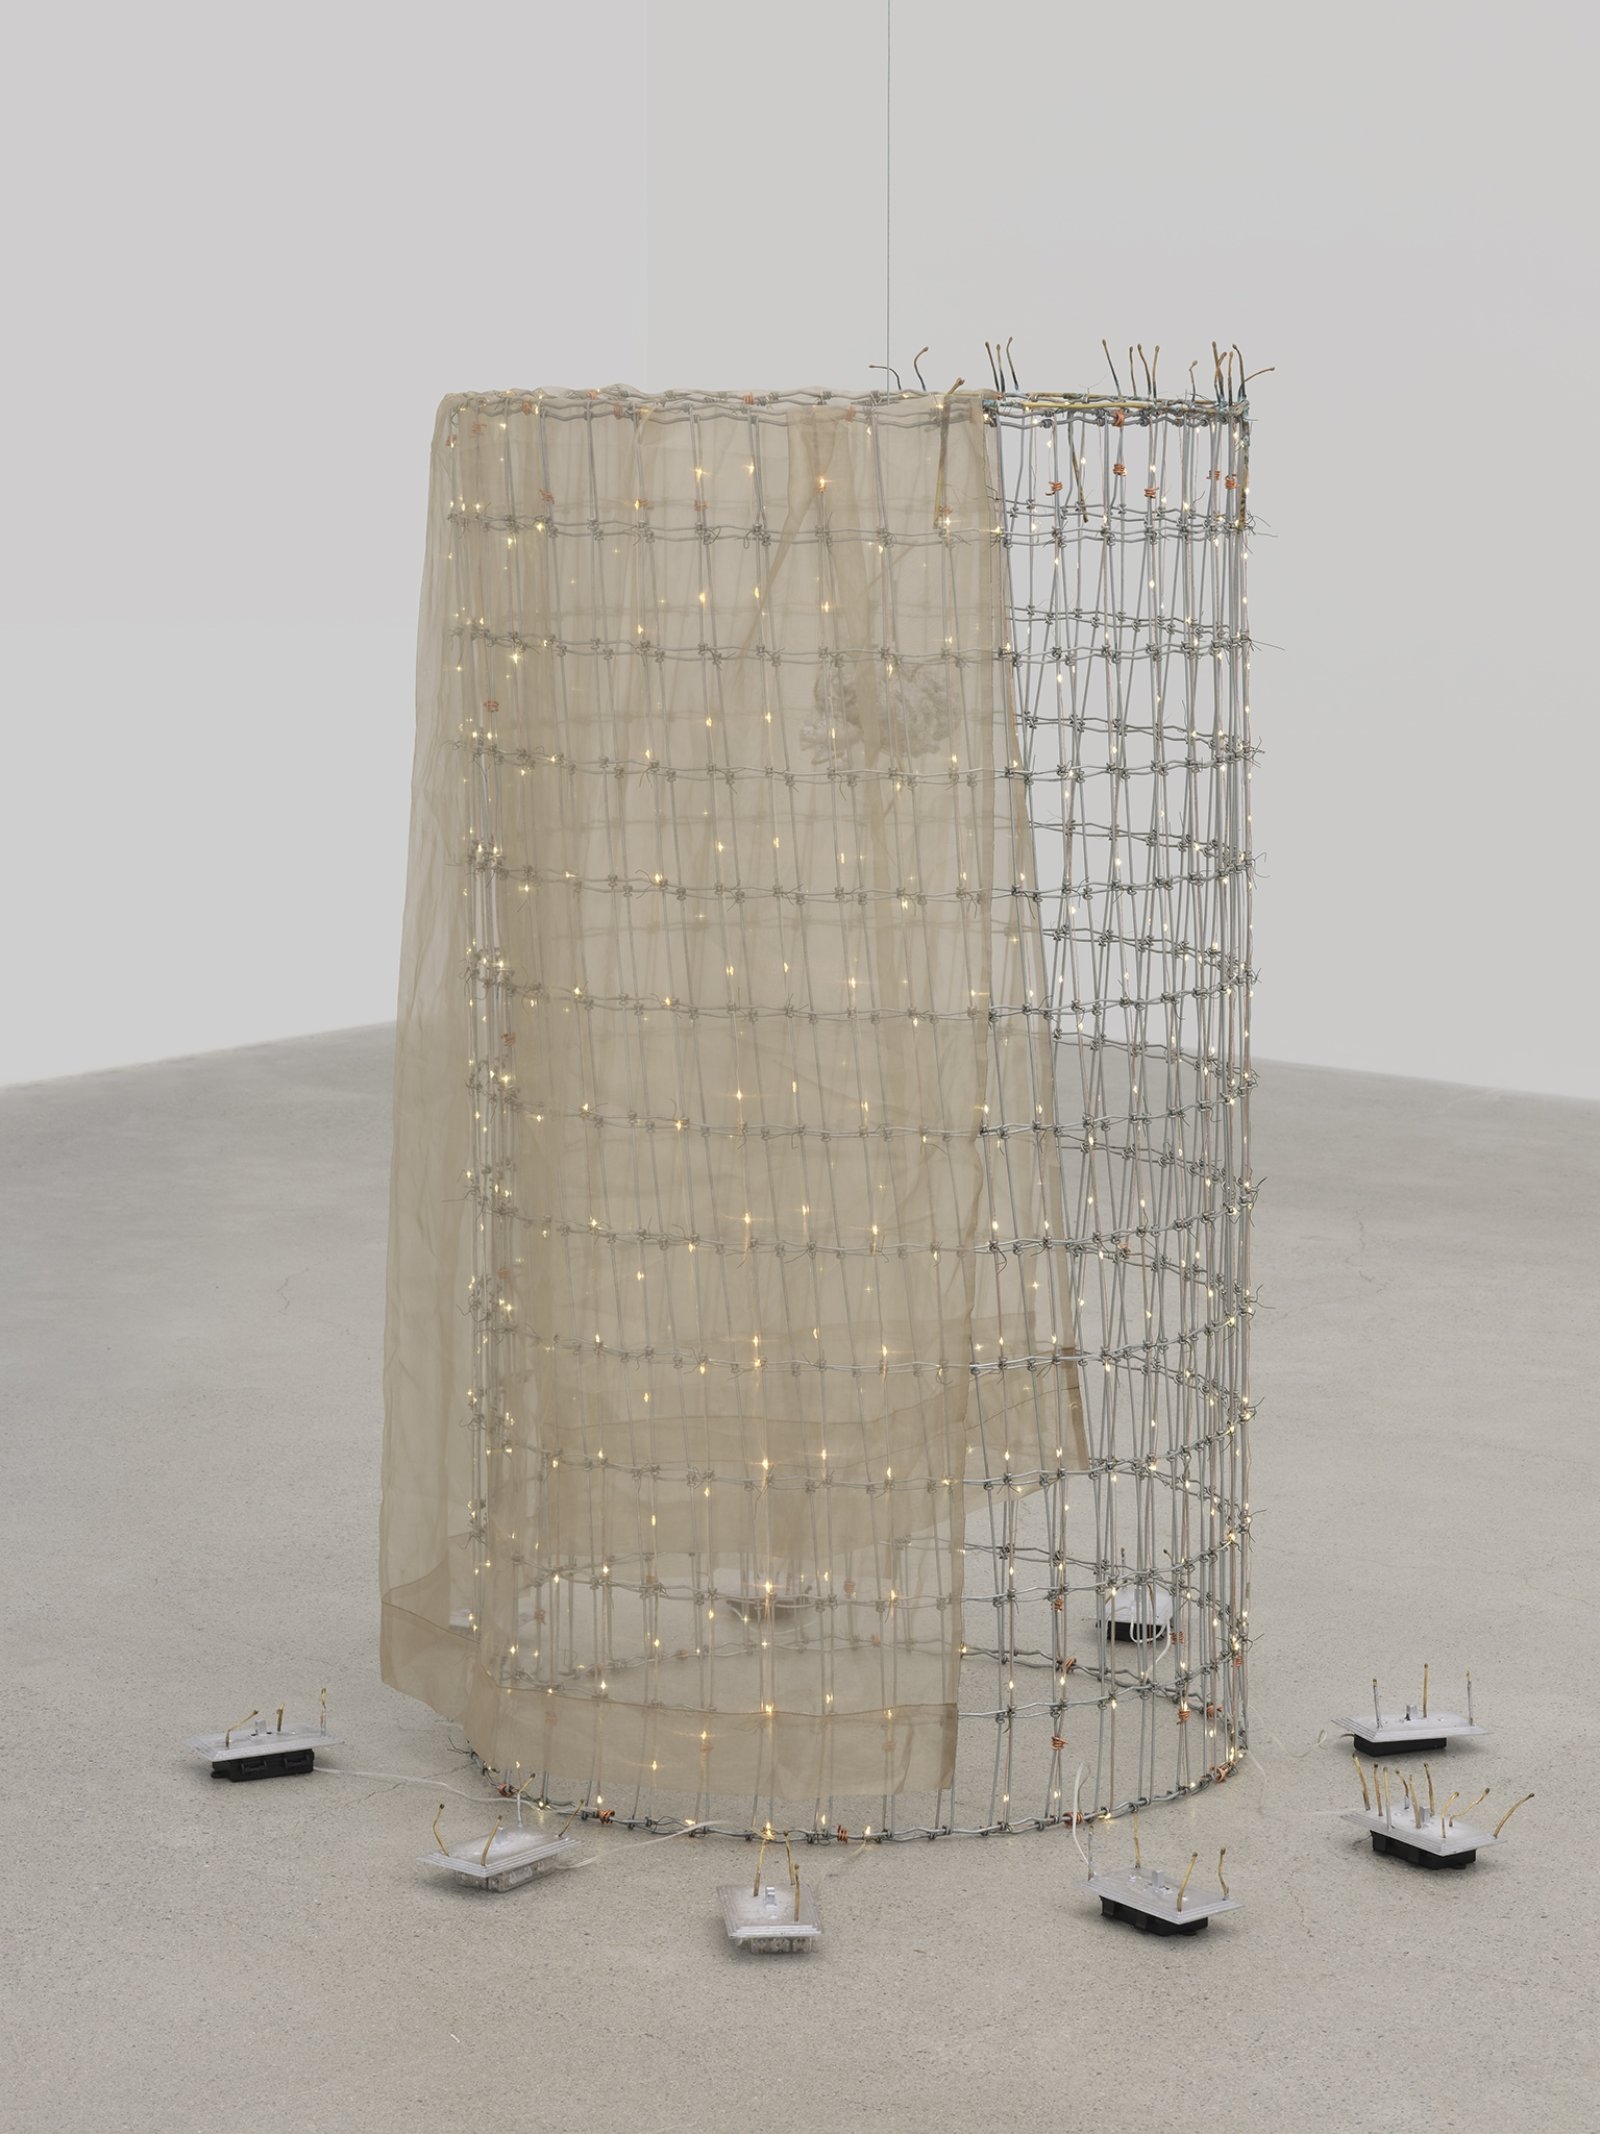 ​Rochelle Goldberg, Trigger: Towards everything they’ve ever wanted, 2019, ranch fencing, batteries, fairy lights, polyester curtain, aluminum, cast bronze matches, copper wire, 51 x 51 x 44 in. (130 x 130 x 112 cm) by Rochelle Goldberg